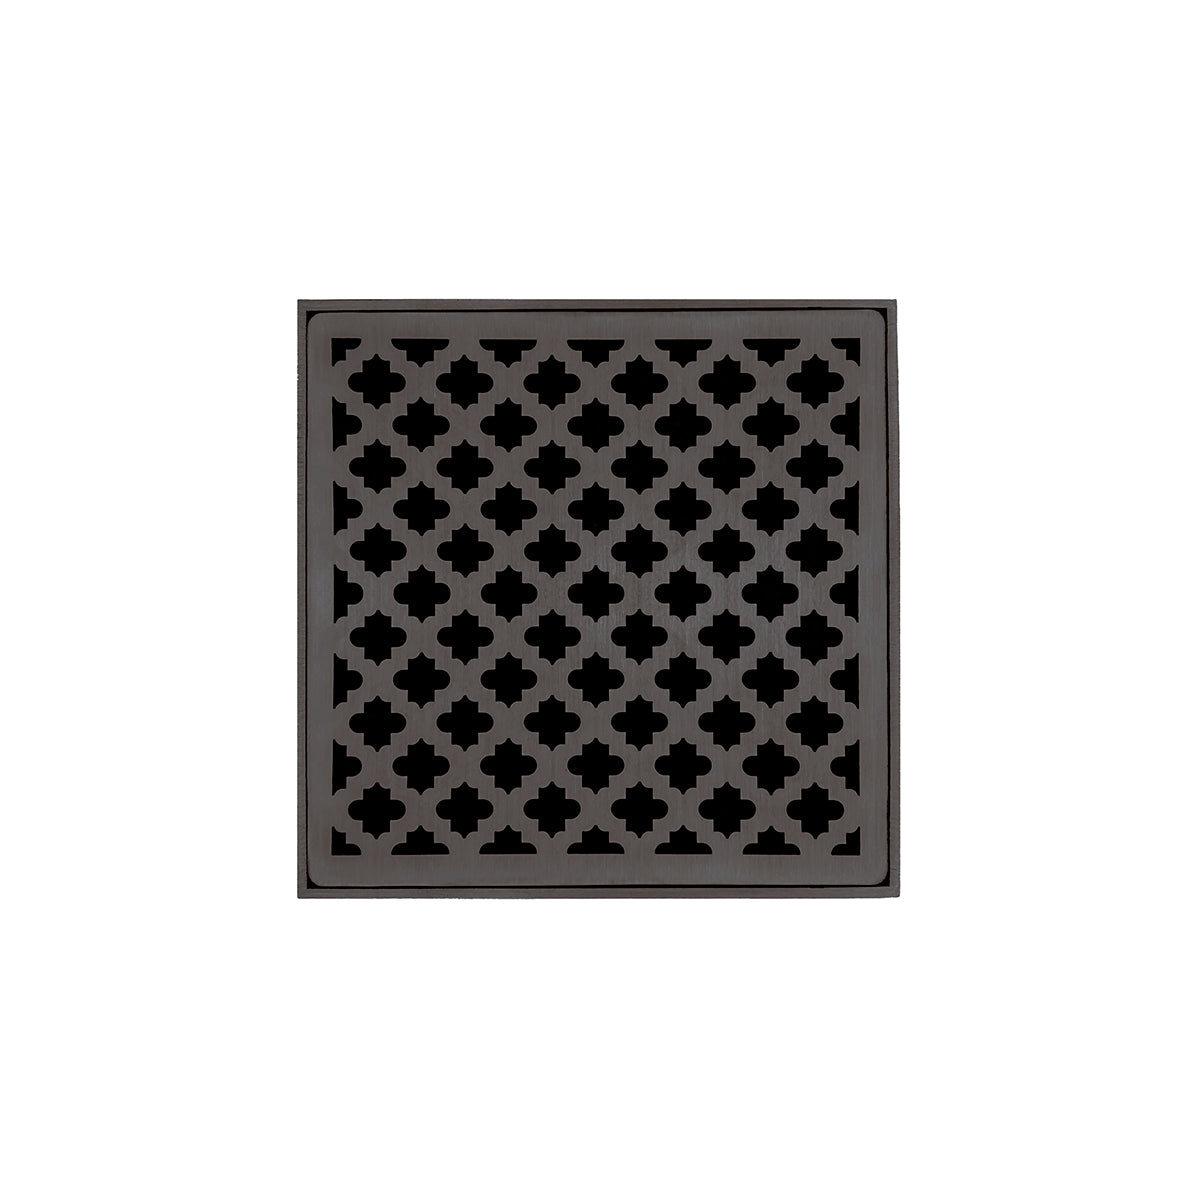 Infinity Drain 5" x 5" Strainer Premium Center Drain Kit with Moor Pattern Decorative Plate and 2" Throat for MD 5